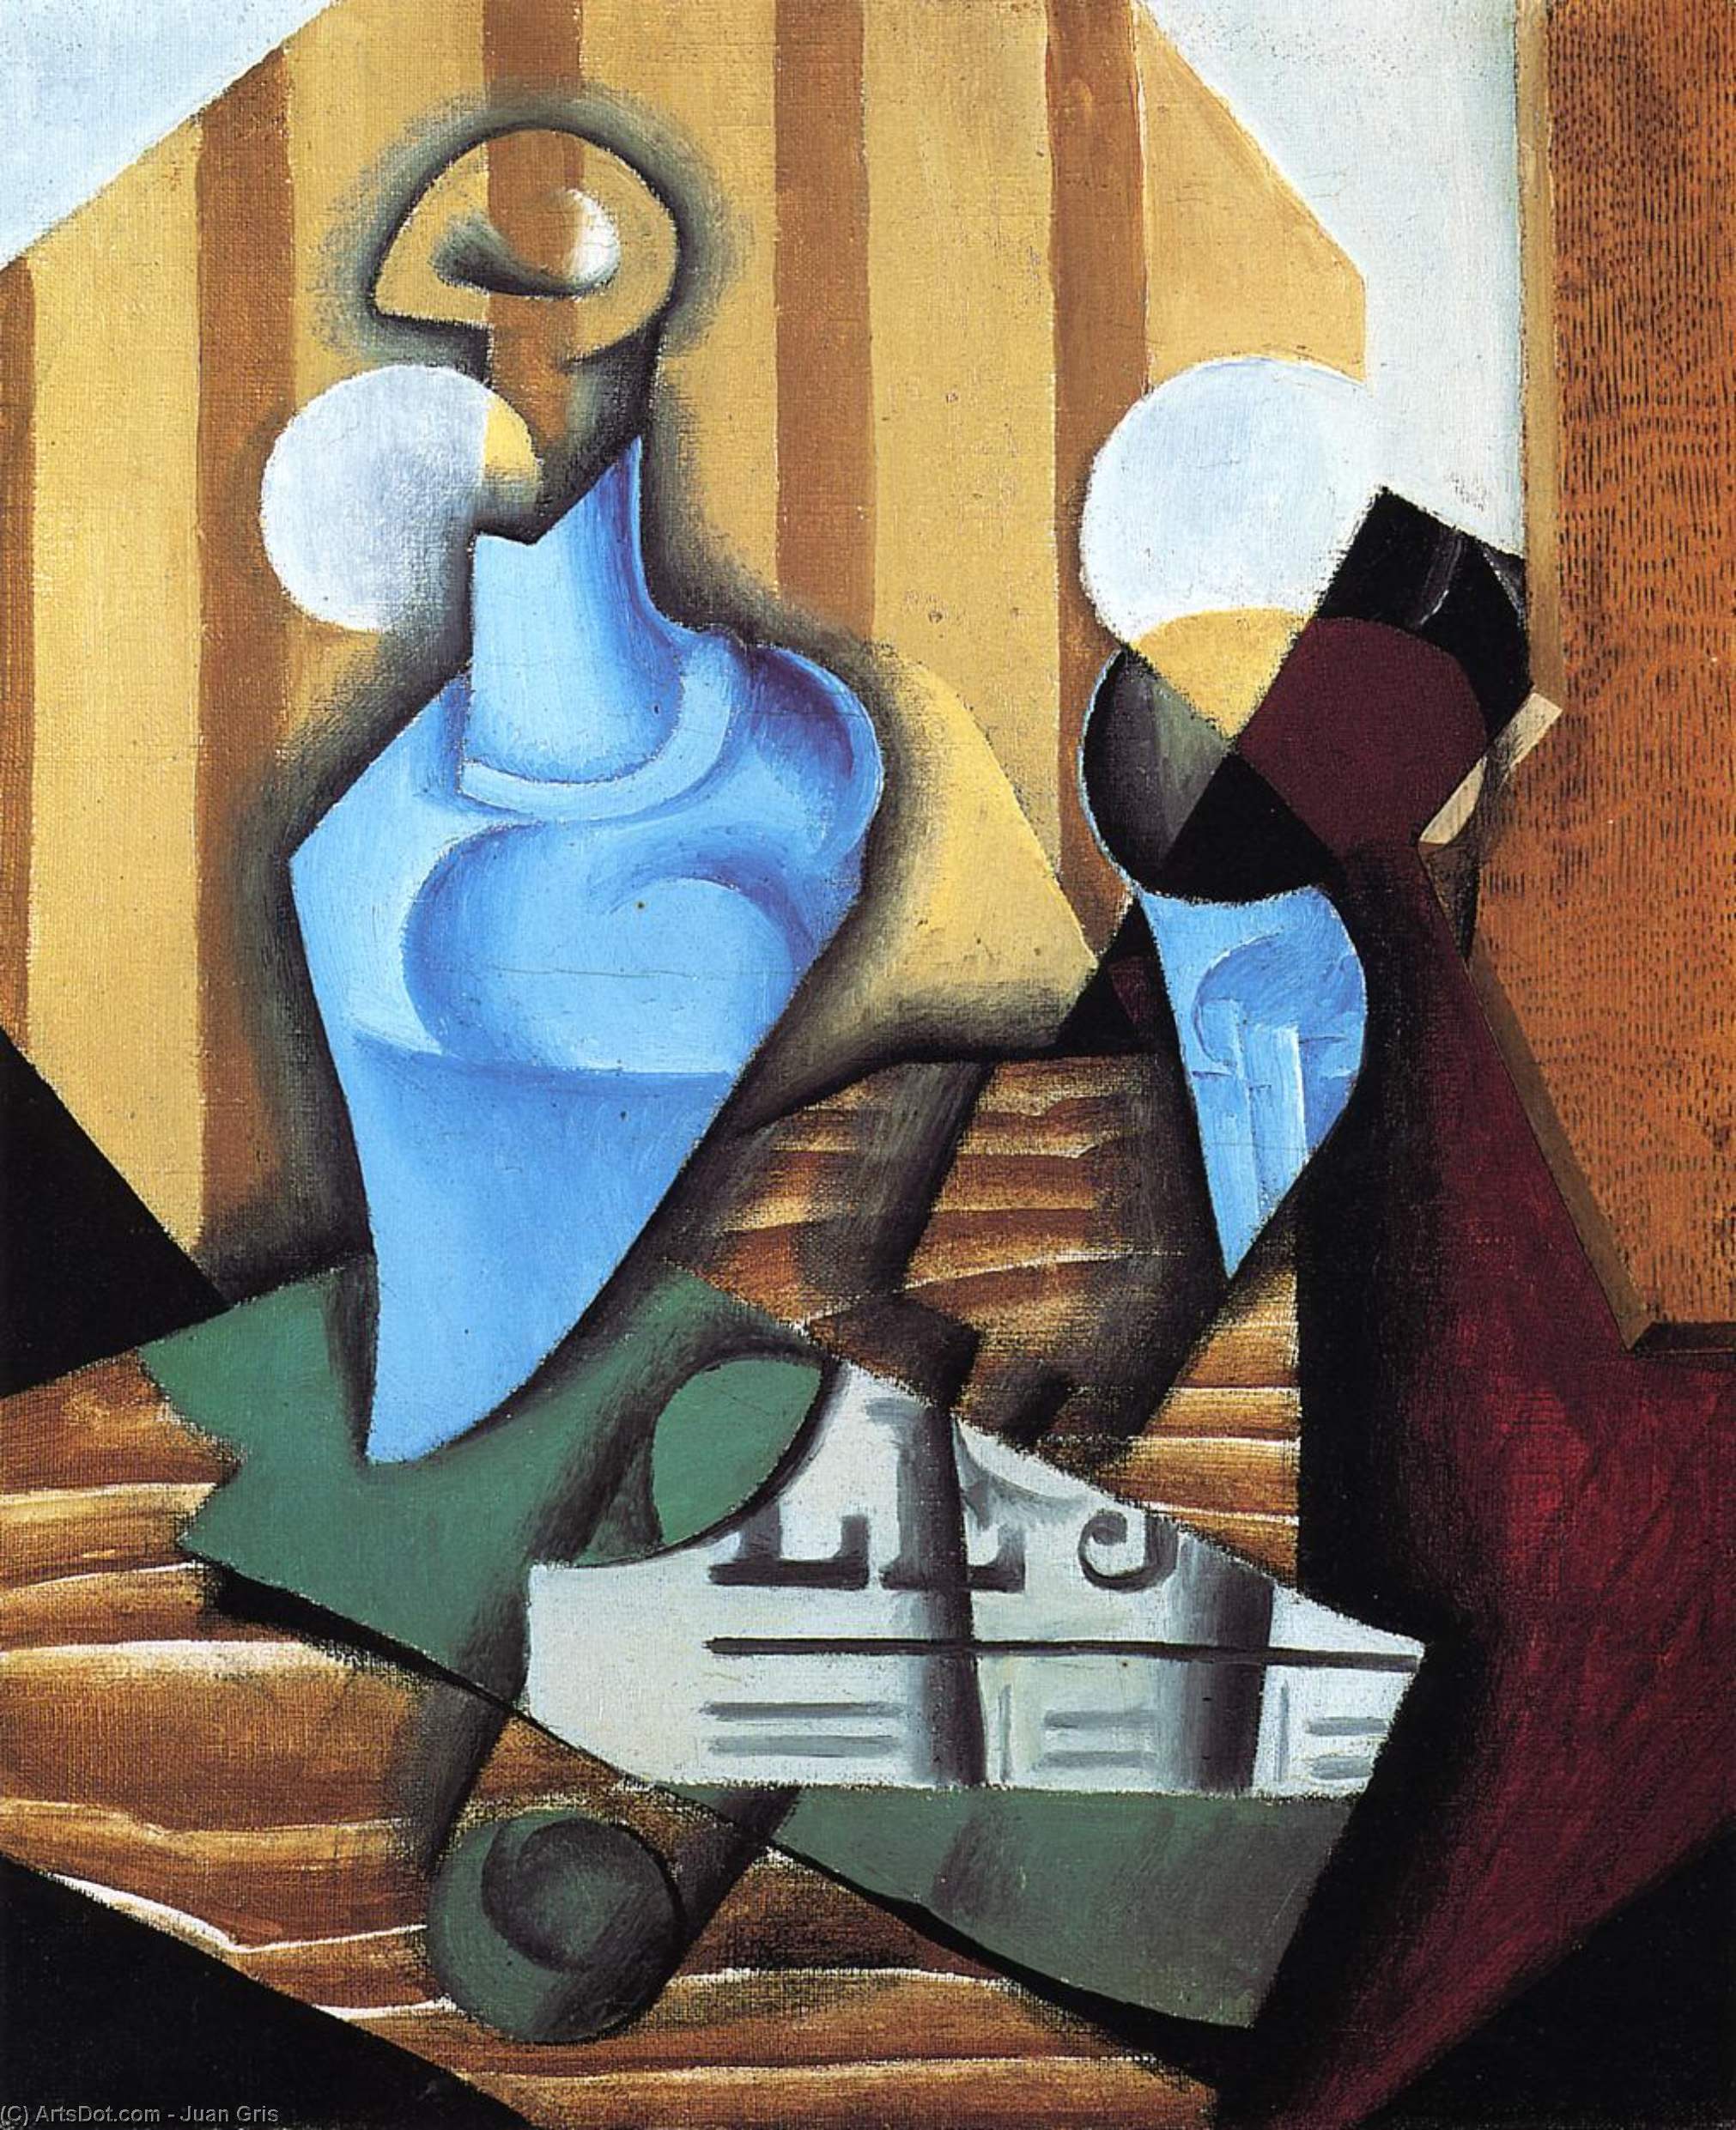 WikiOO.org - Encyclopedia of Fine Arts - Malba, Artwork Juan Gris - Still Life with Bottle and Glass